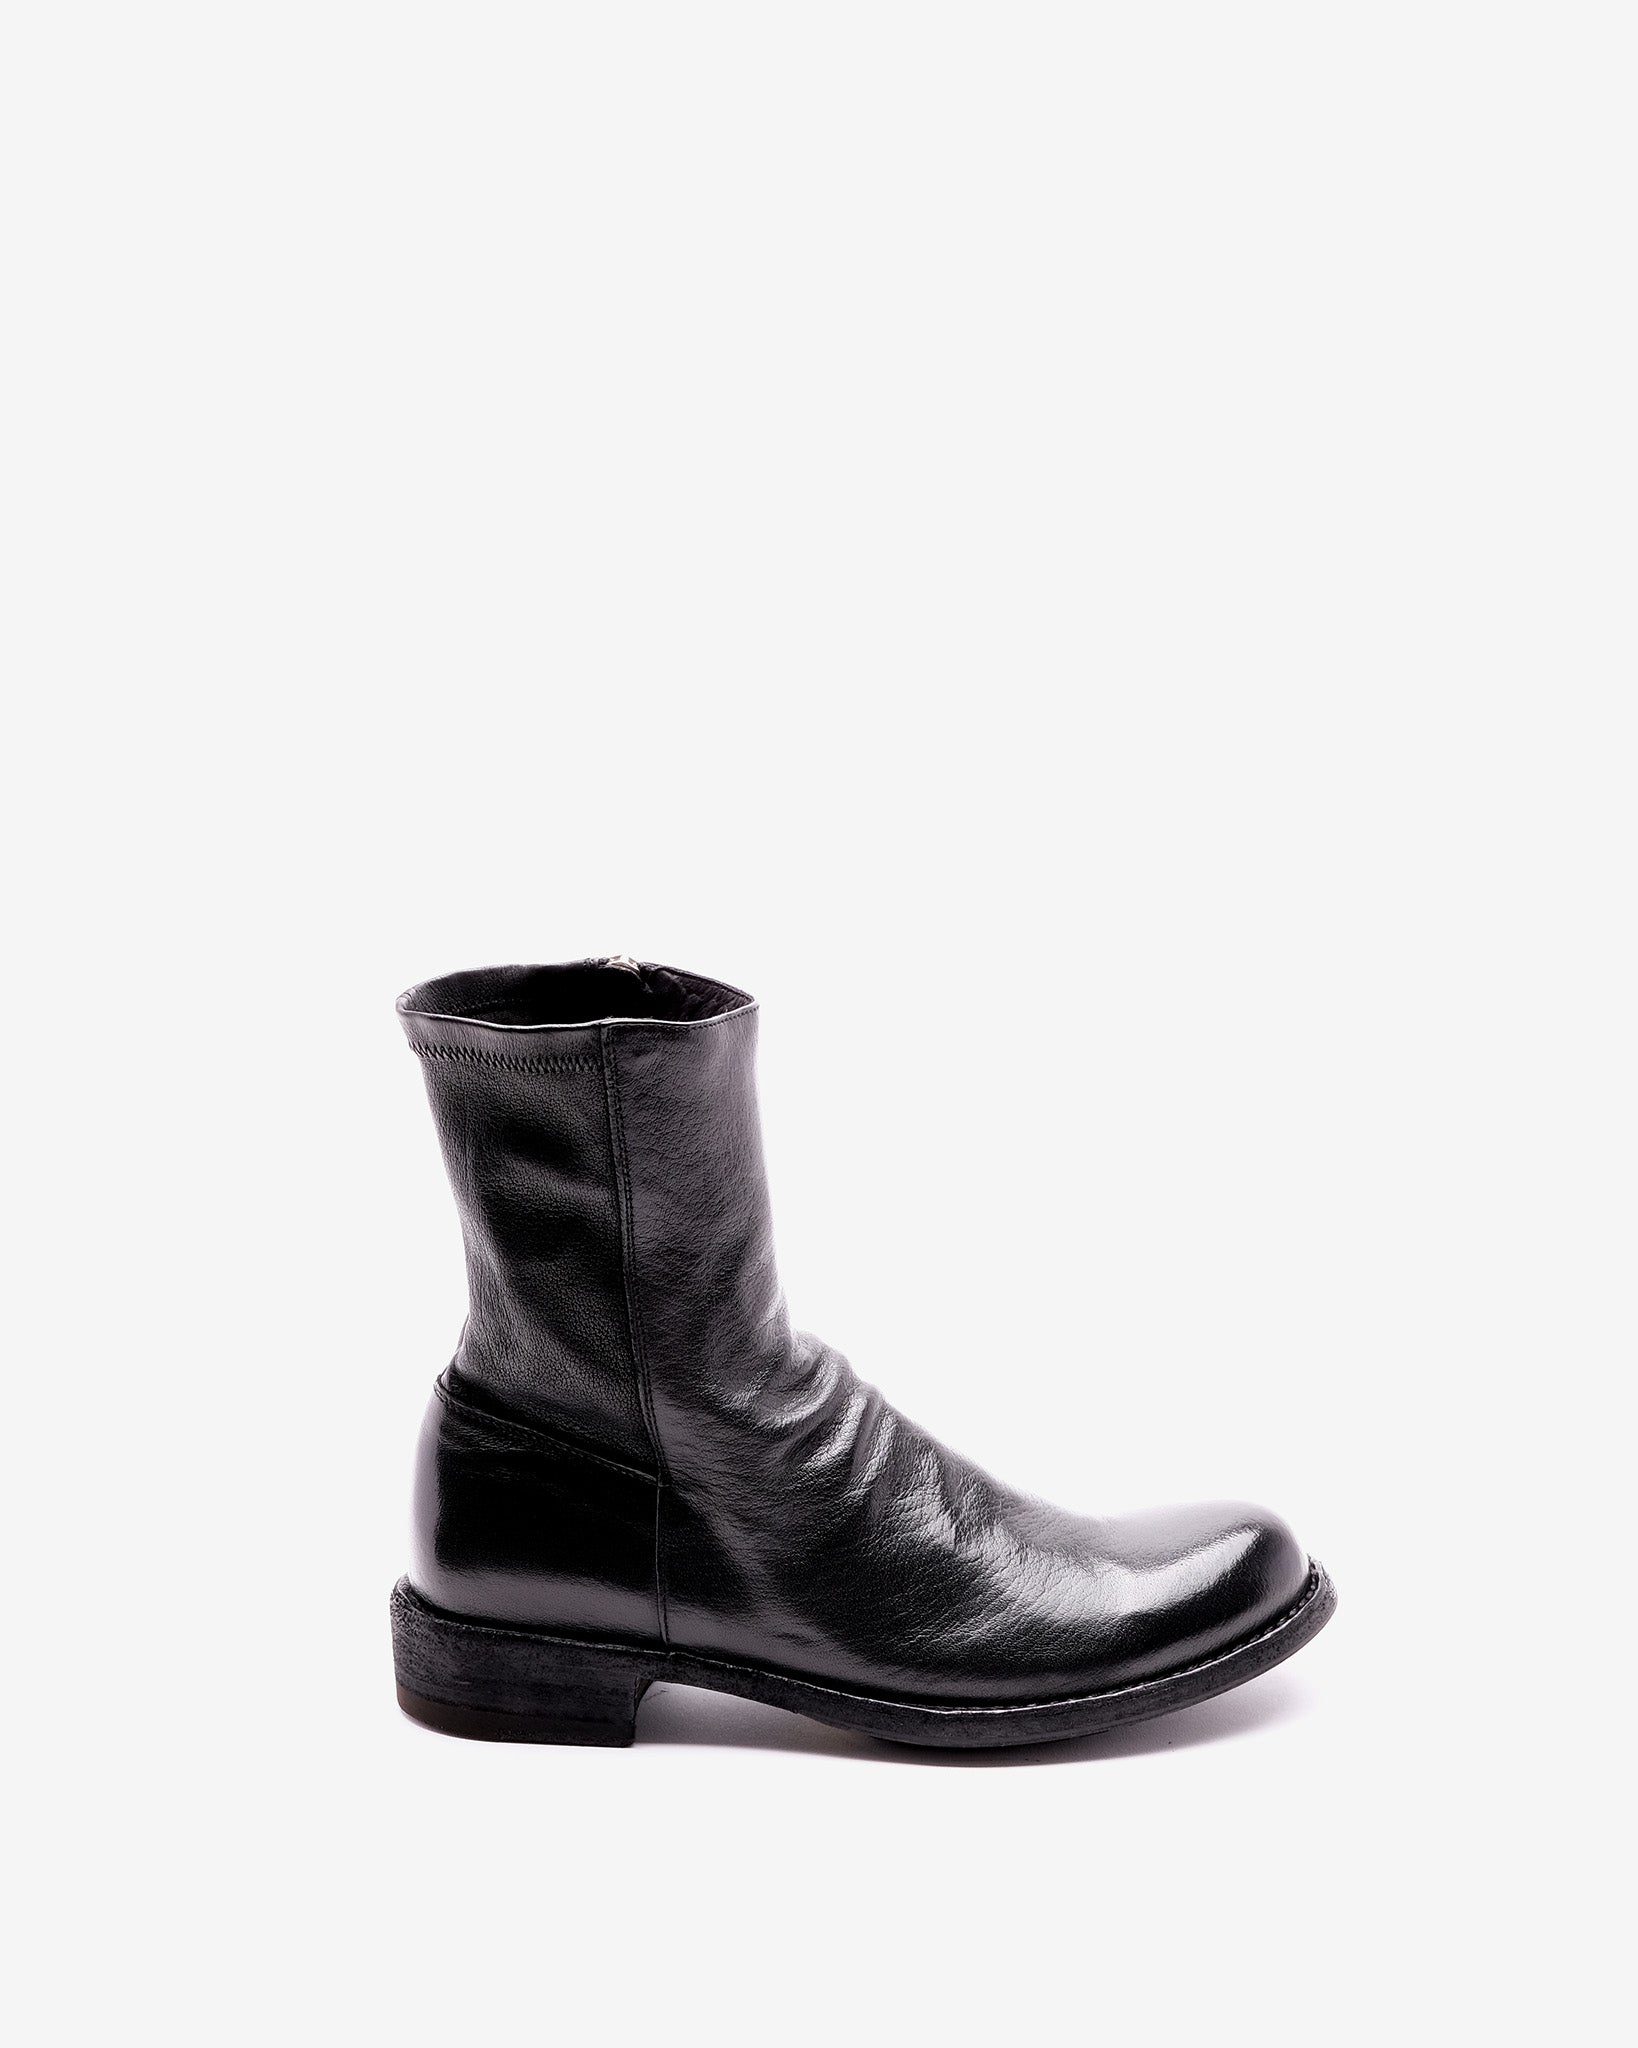 Legrand 203 Ignis Stretch T. Nero Leather Boots